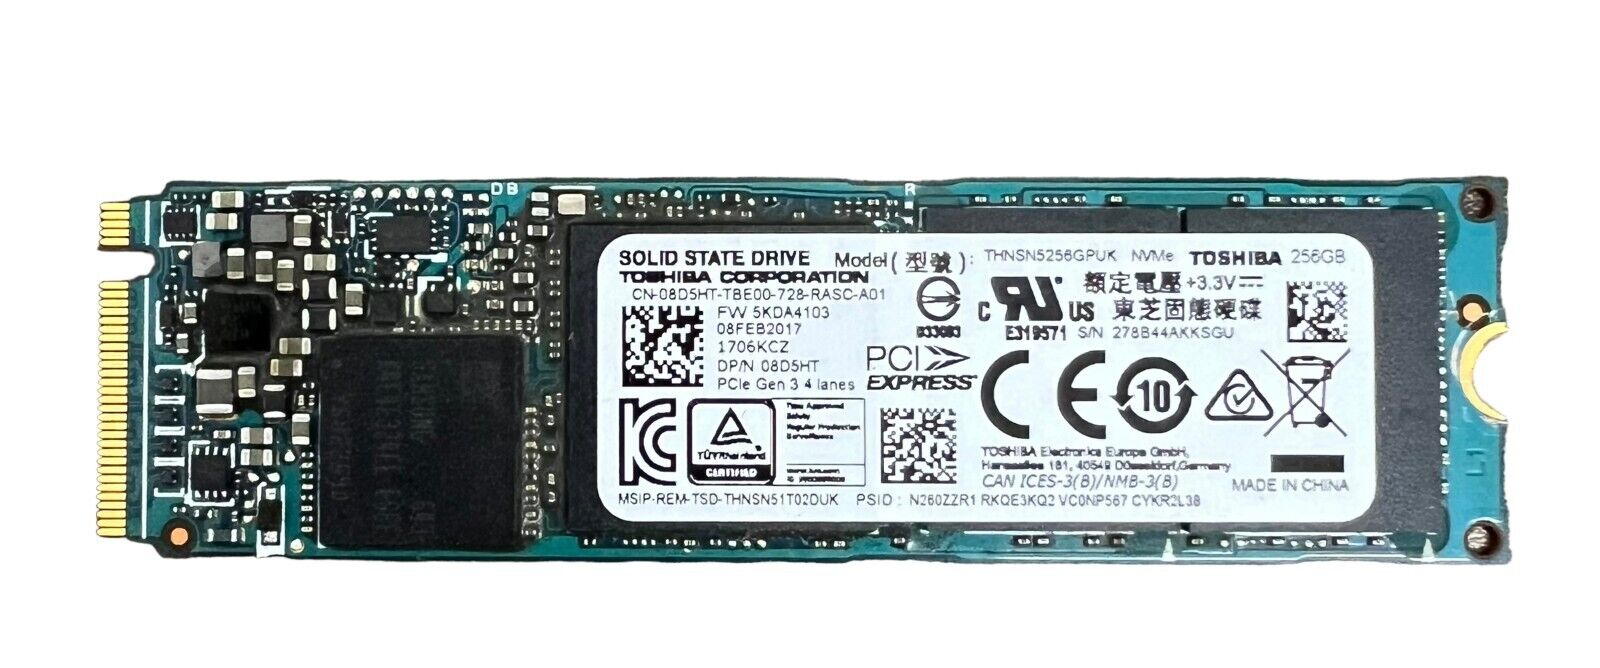 Toshiba 256GB PCIe SSD Solid State Drive THNSN5256GPUK